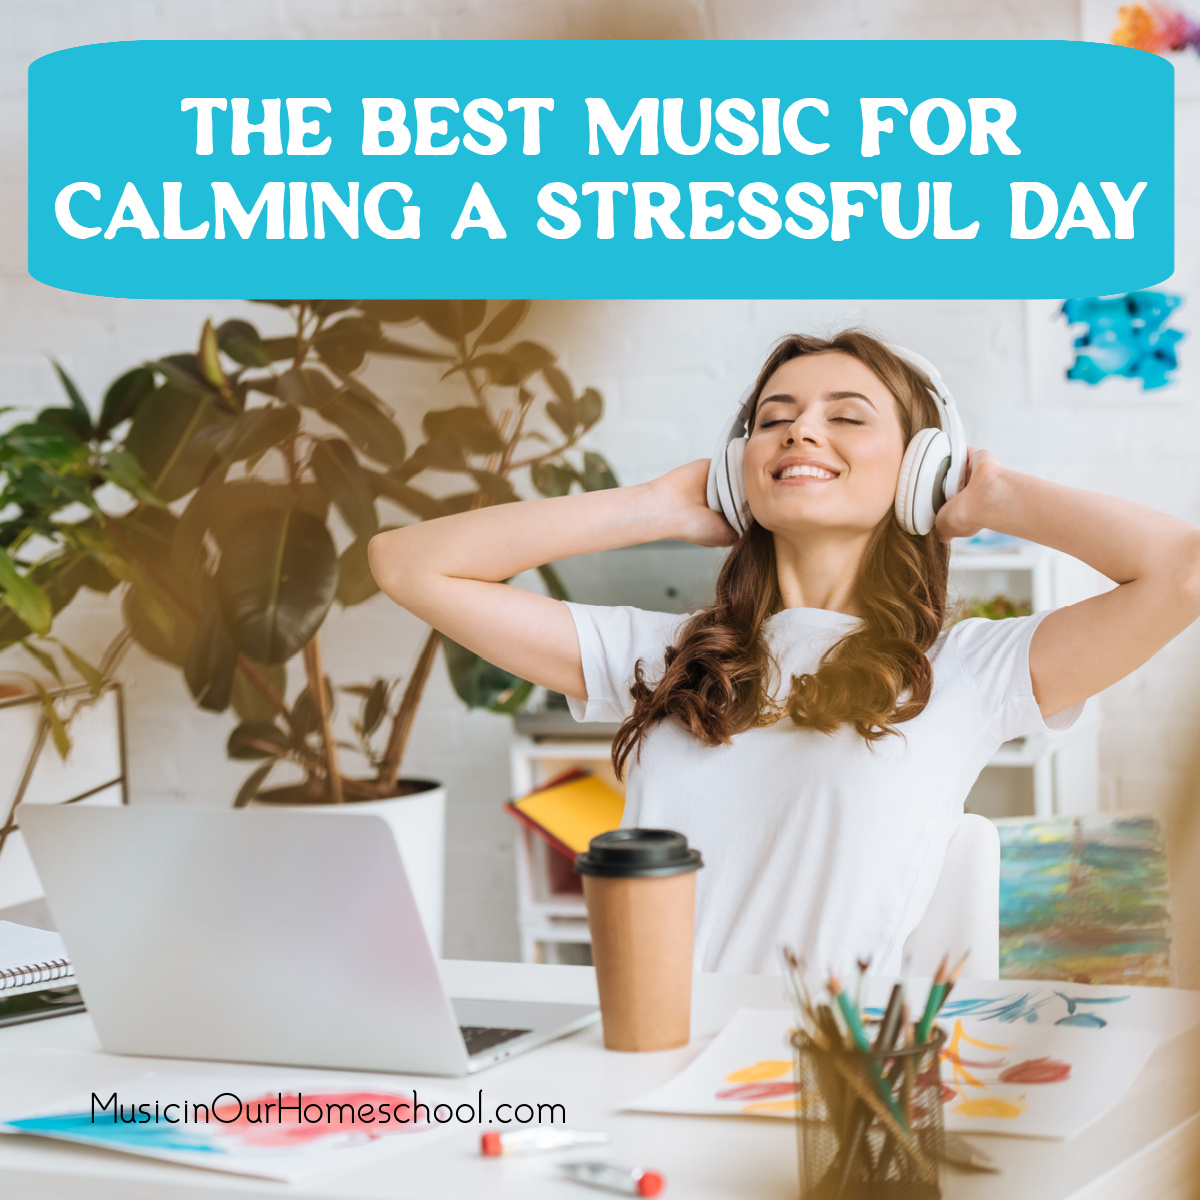 The Best Music for Calming a Stressful Day